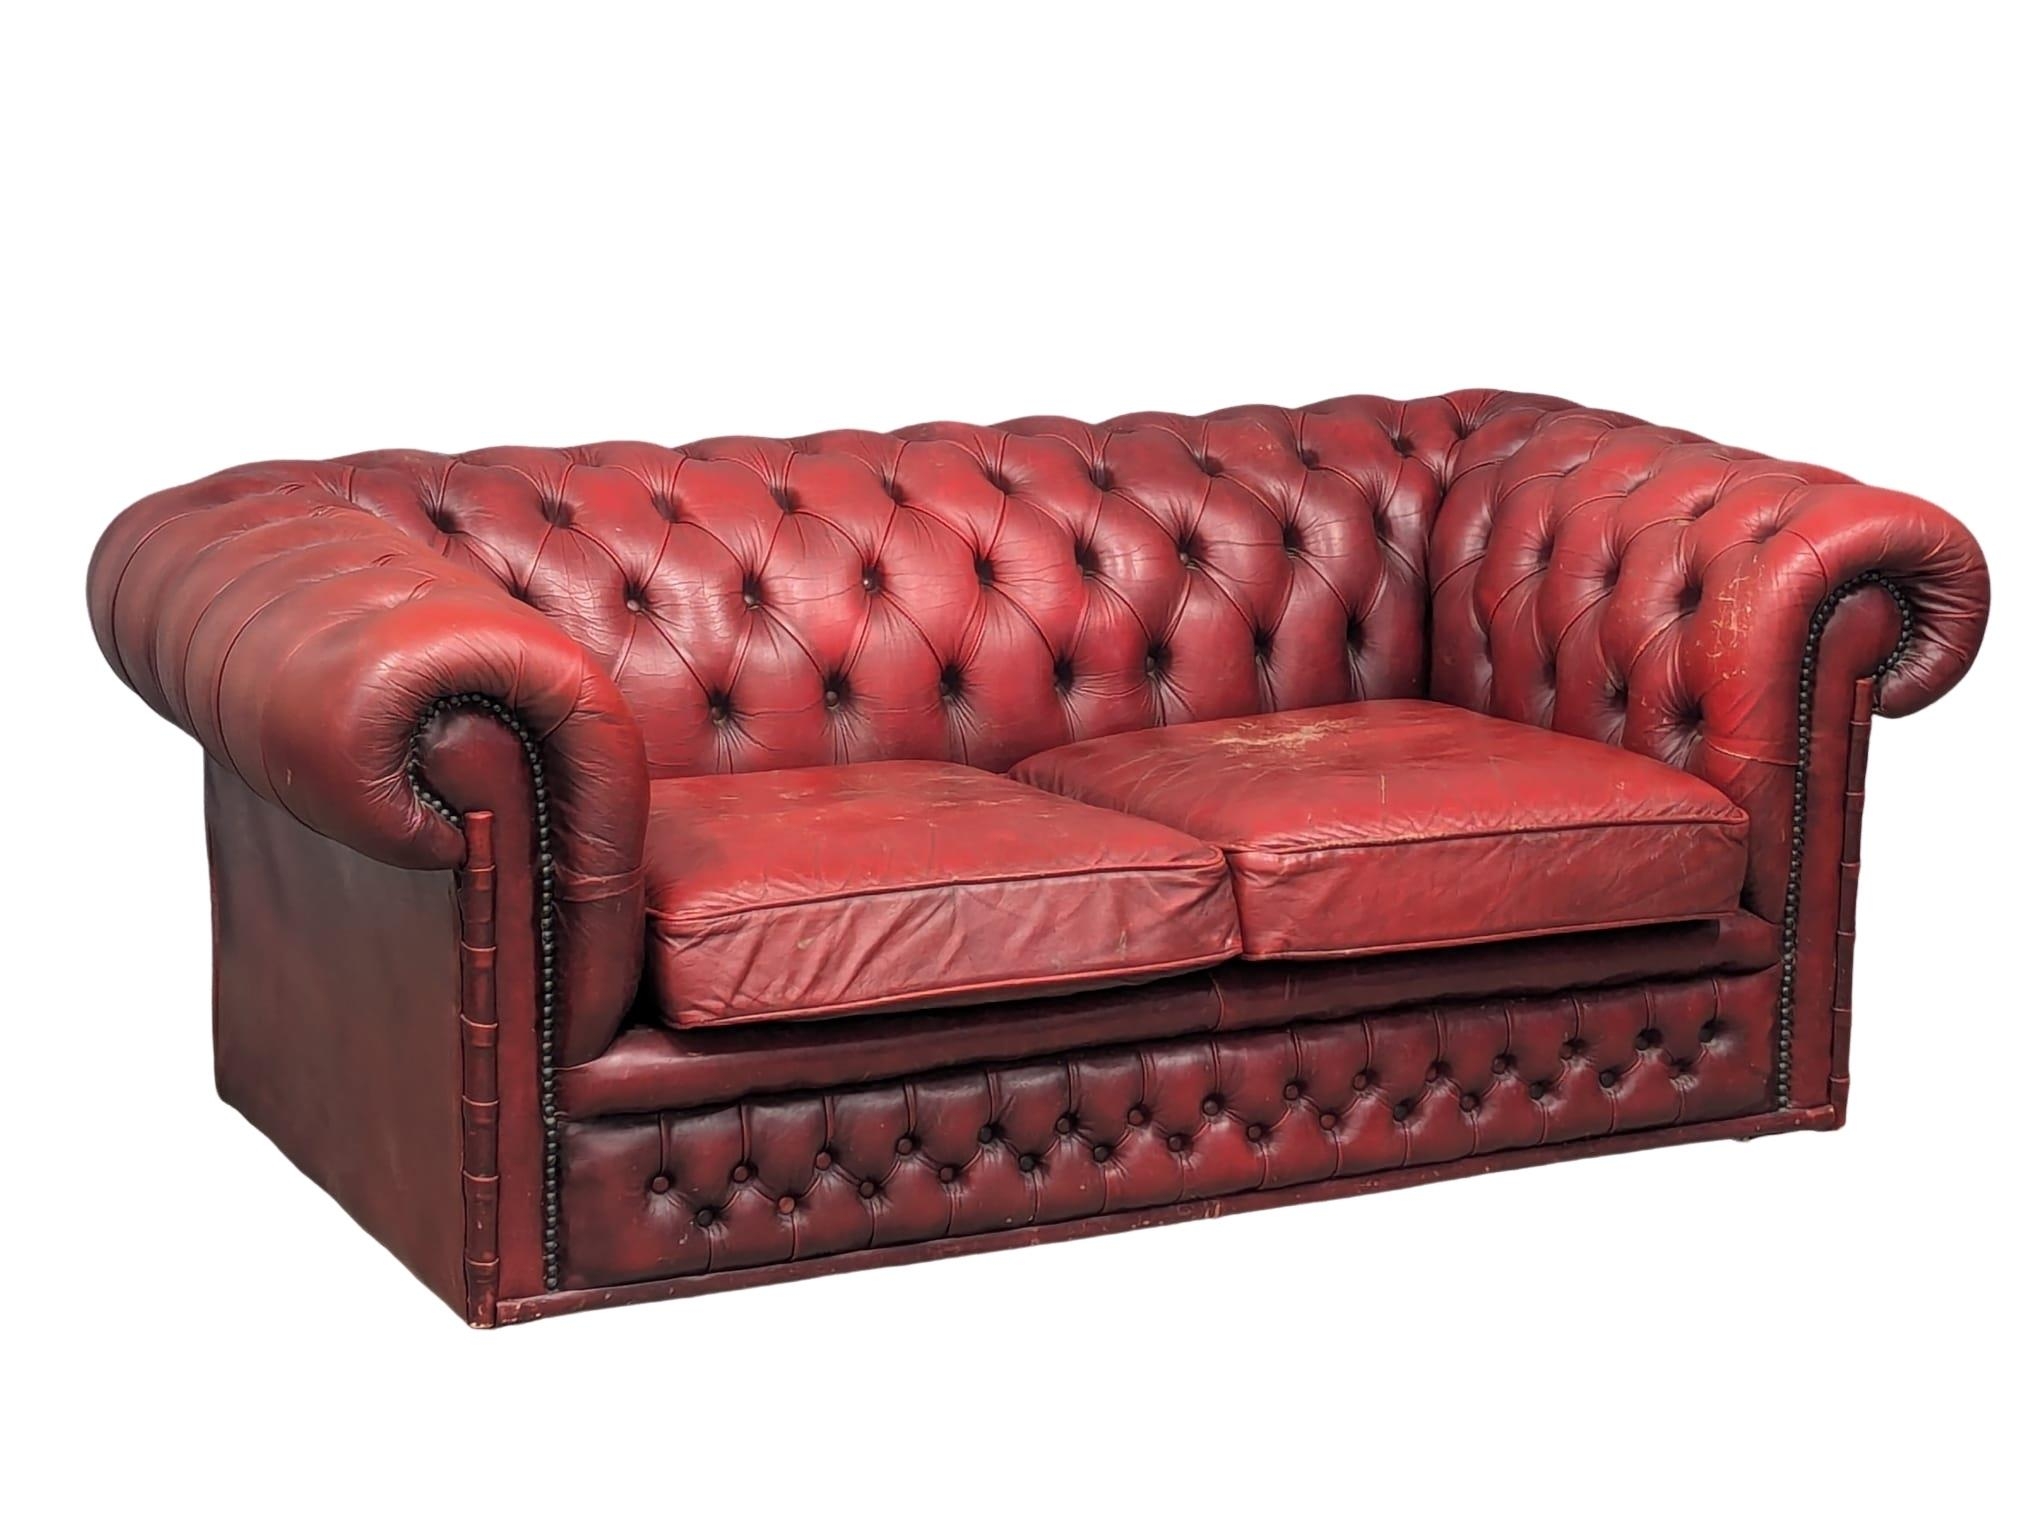 A 2 seater Chesterfield style button back sofa, 169cm